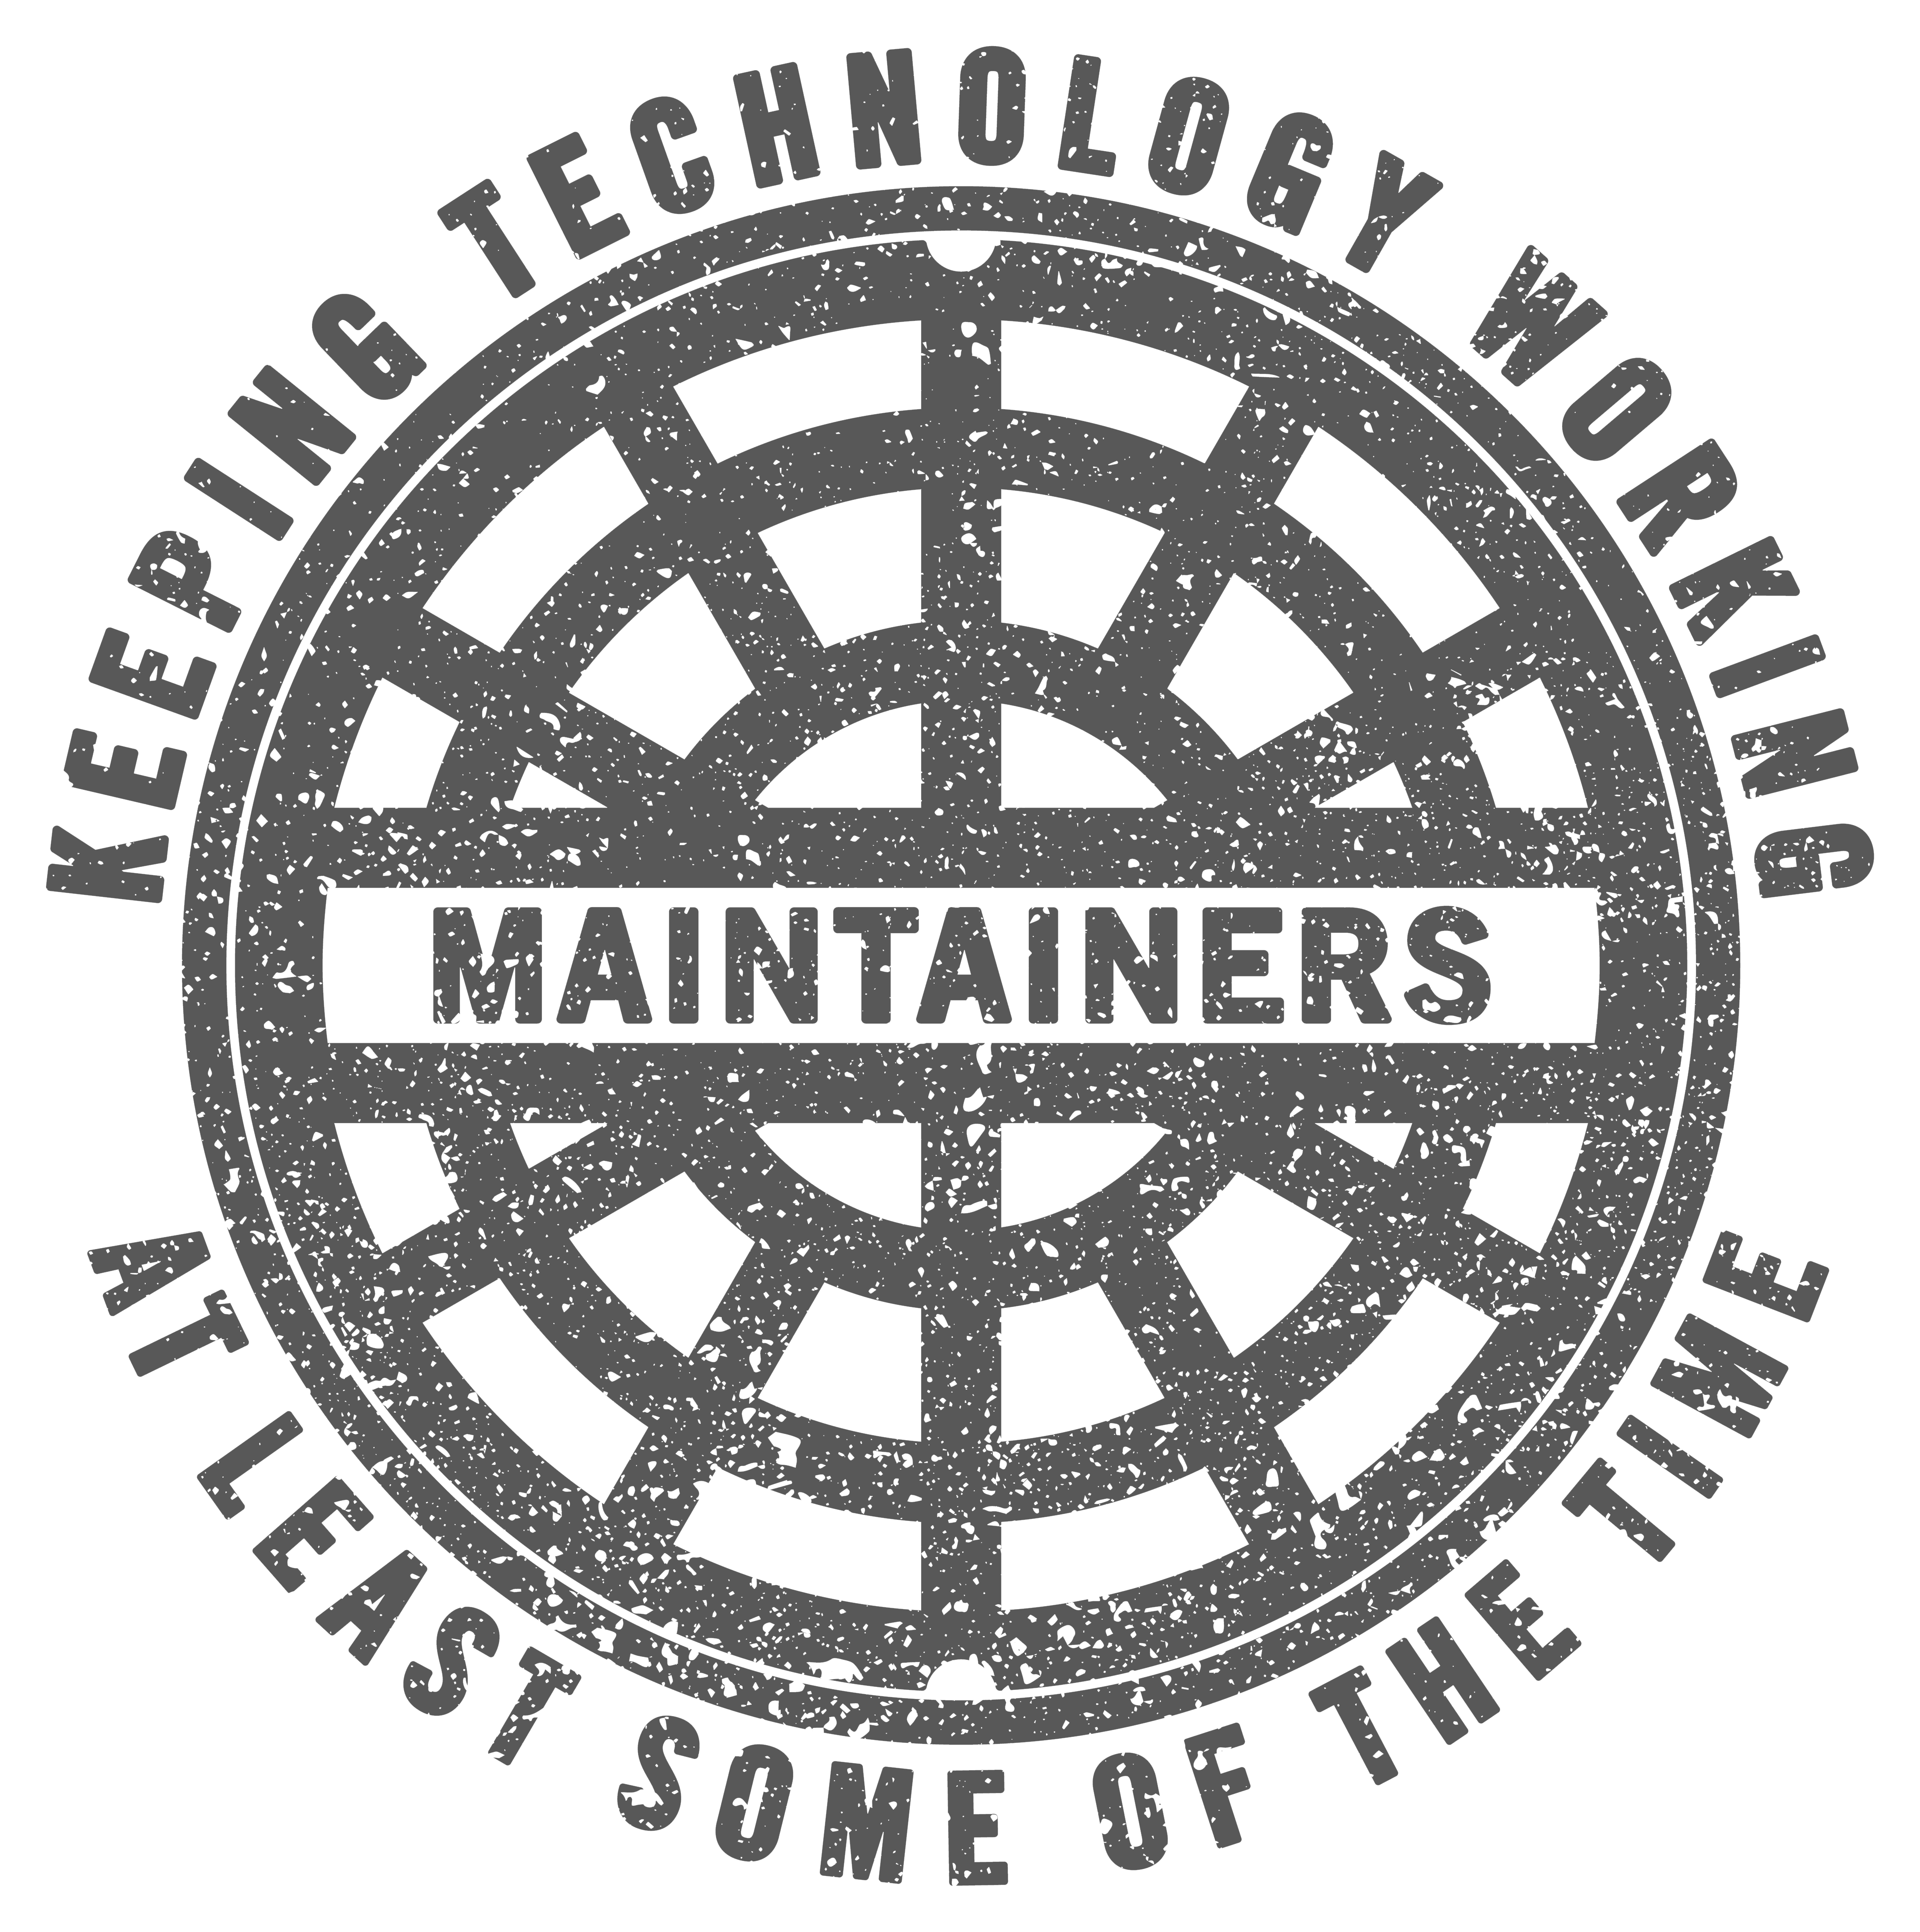 Maintainers logo that reads keeping technology working at least some of the time